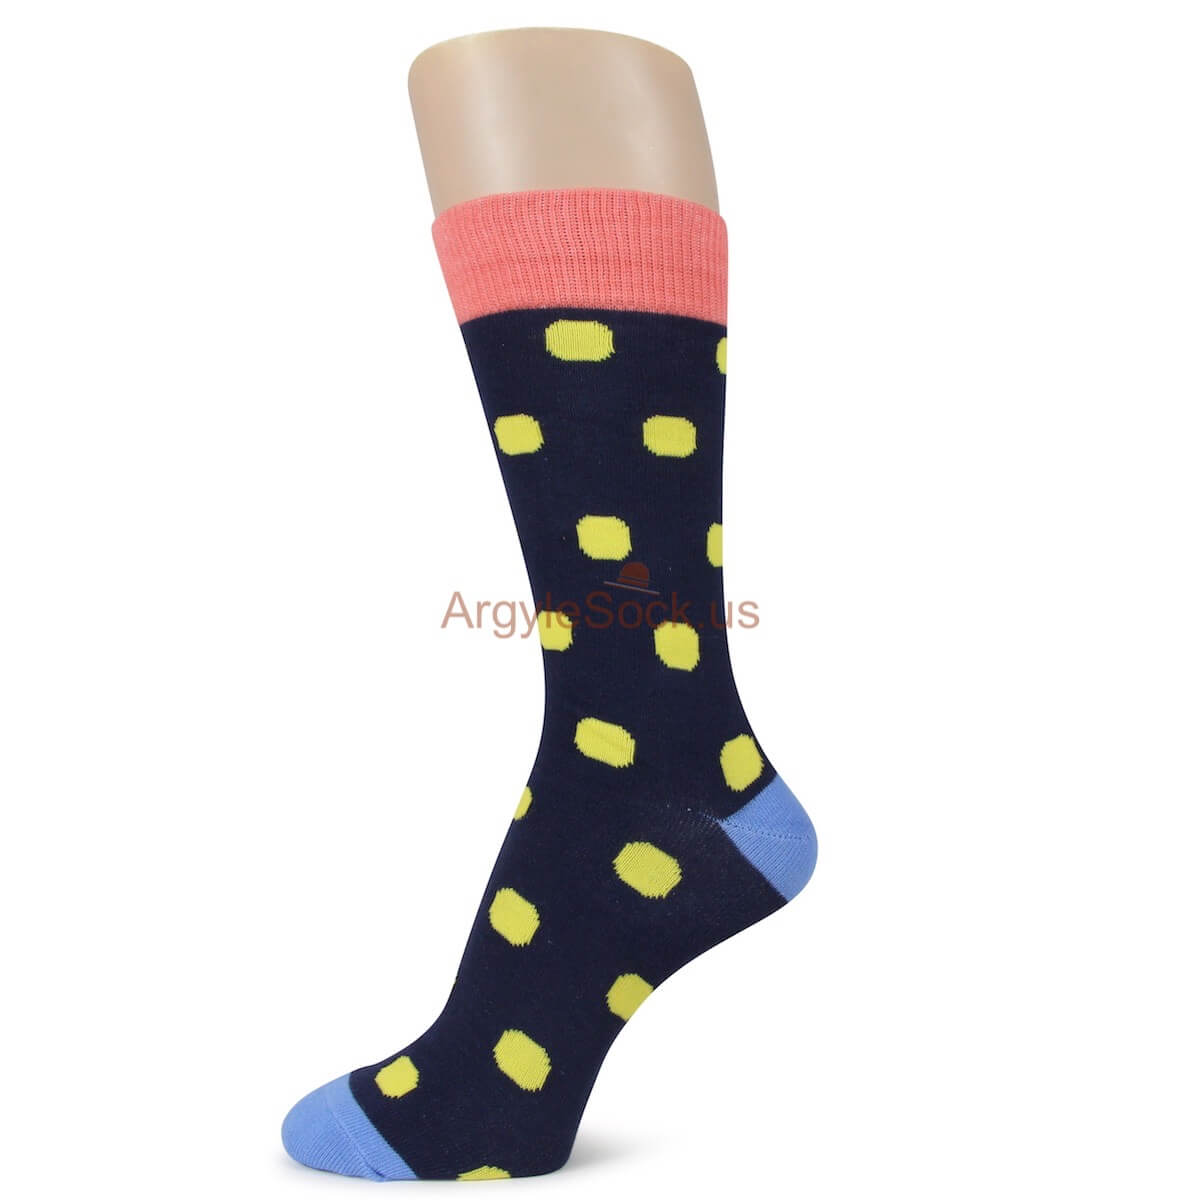 Black, Peach and Blue with Yellow Polka dots Mens Socks